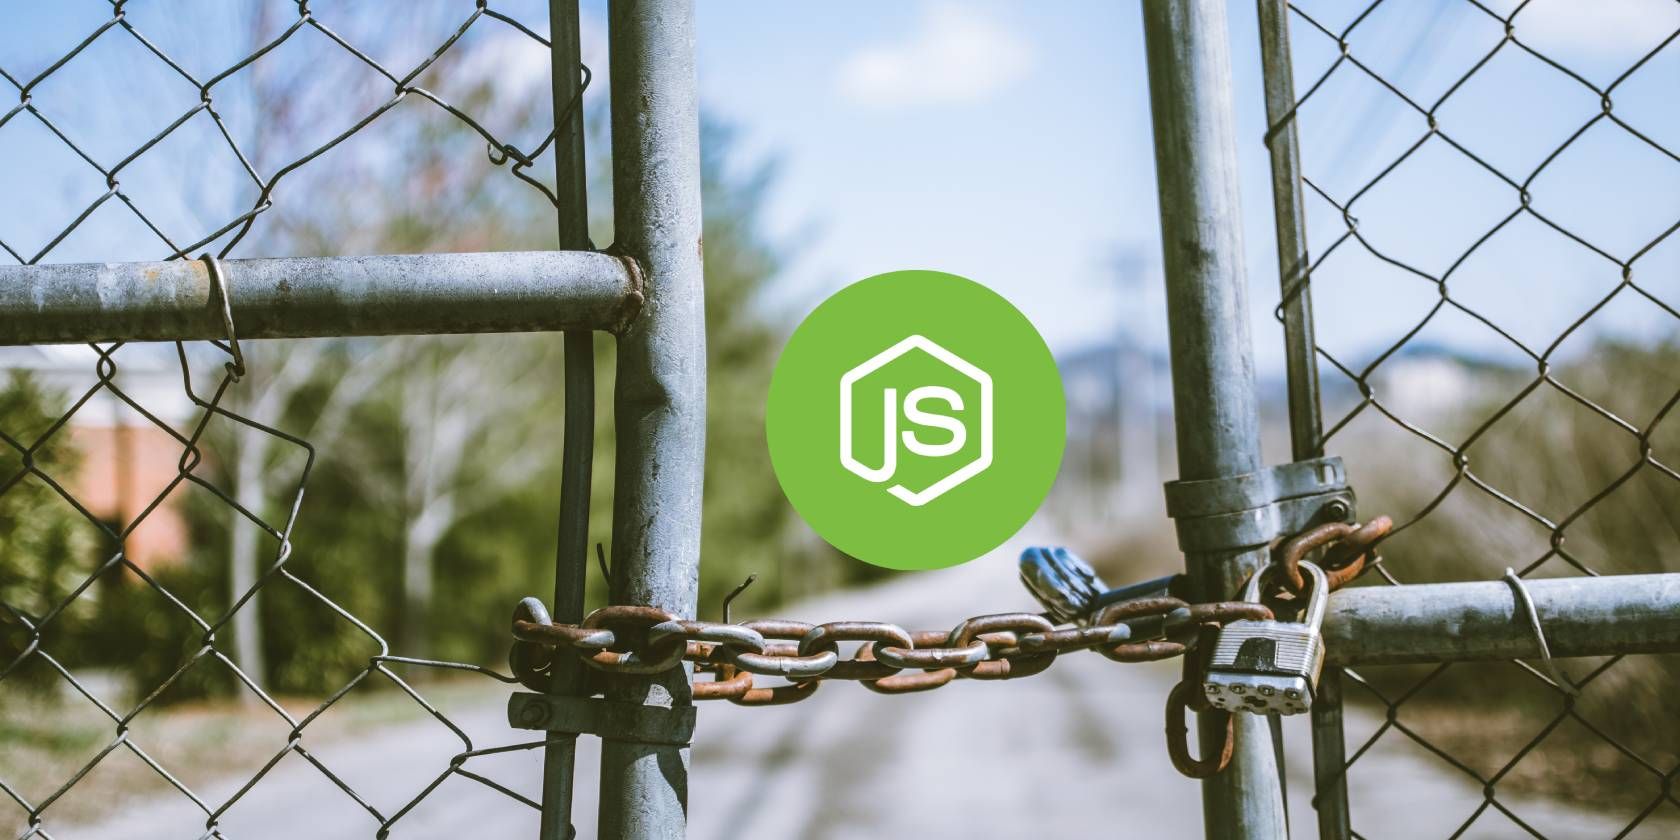 Two metal fence panels joined by a chain with a large gap between them. In the gap is a green Node.js logo.